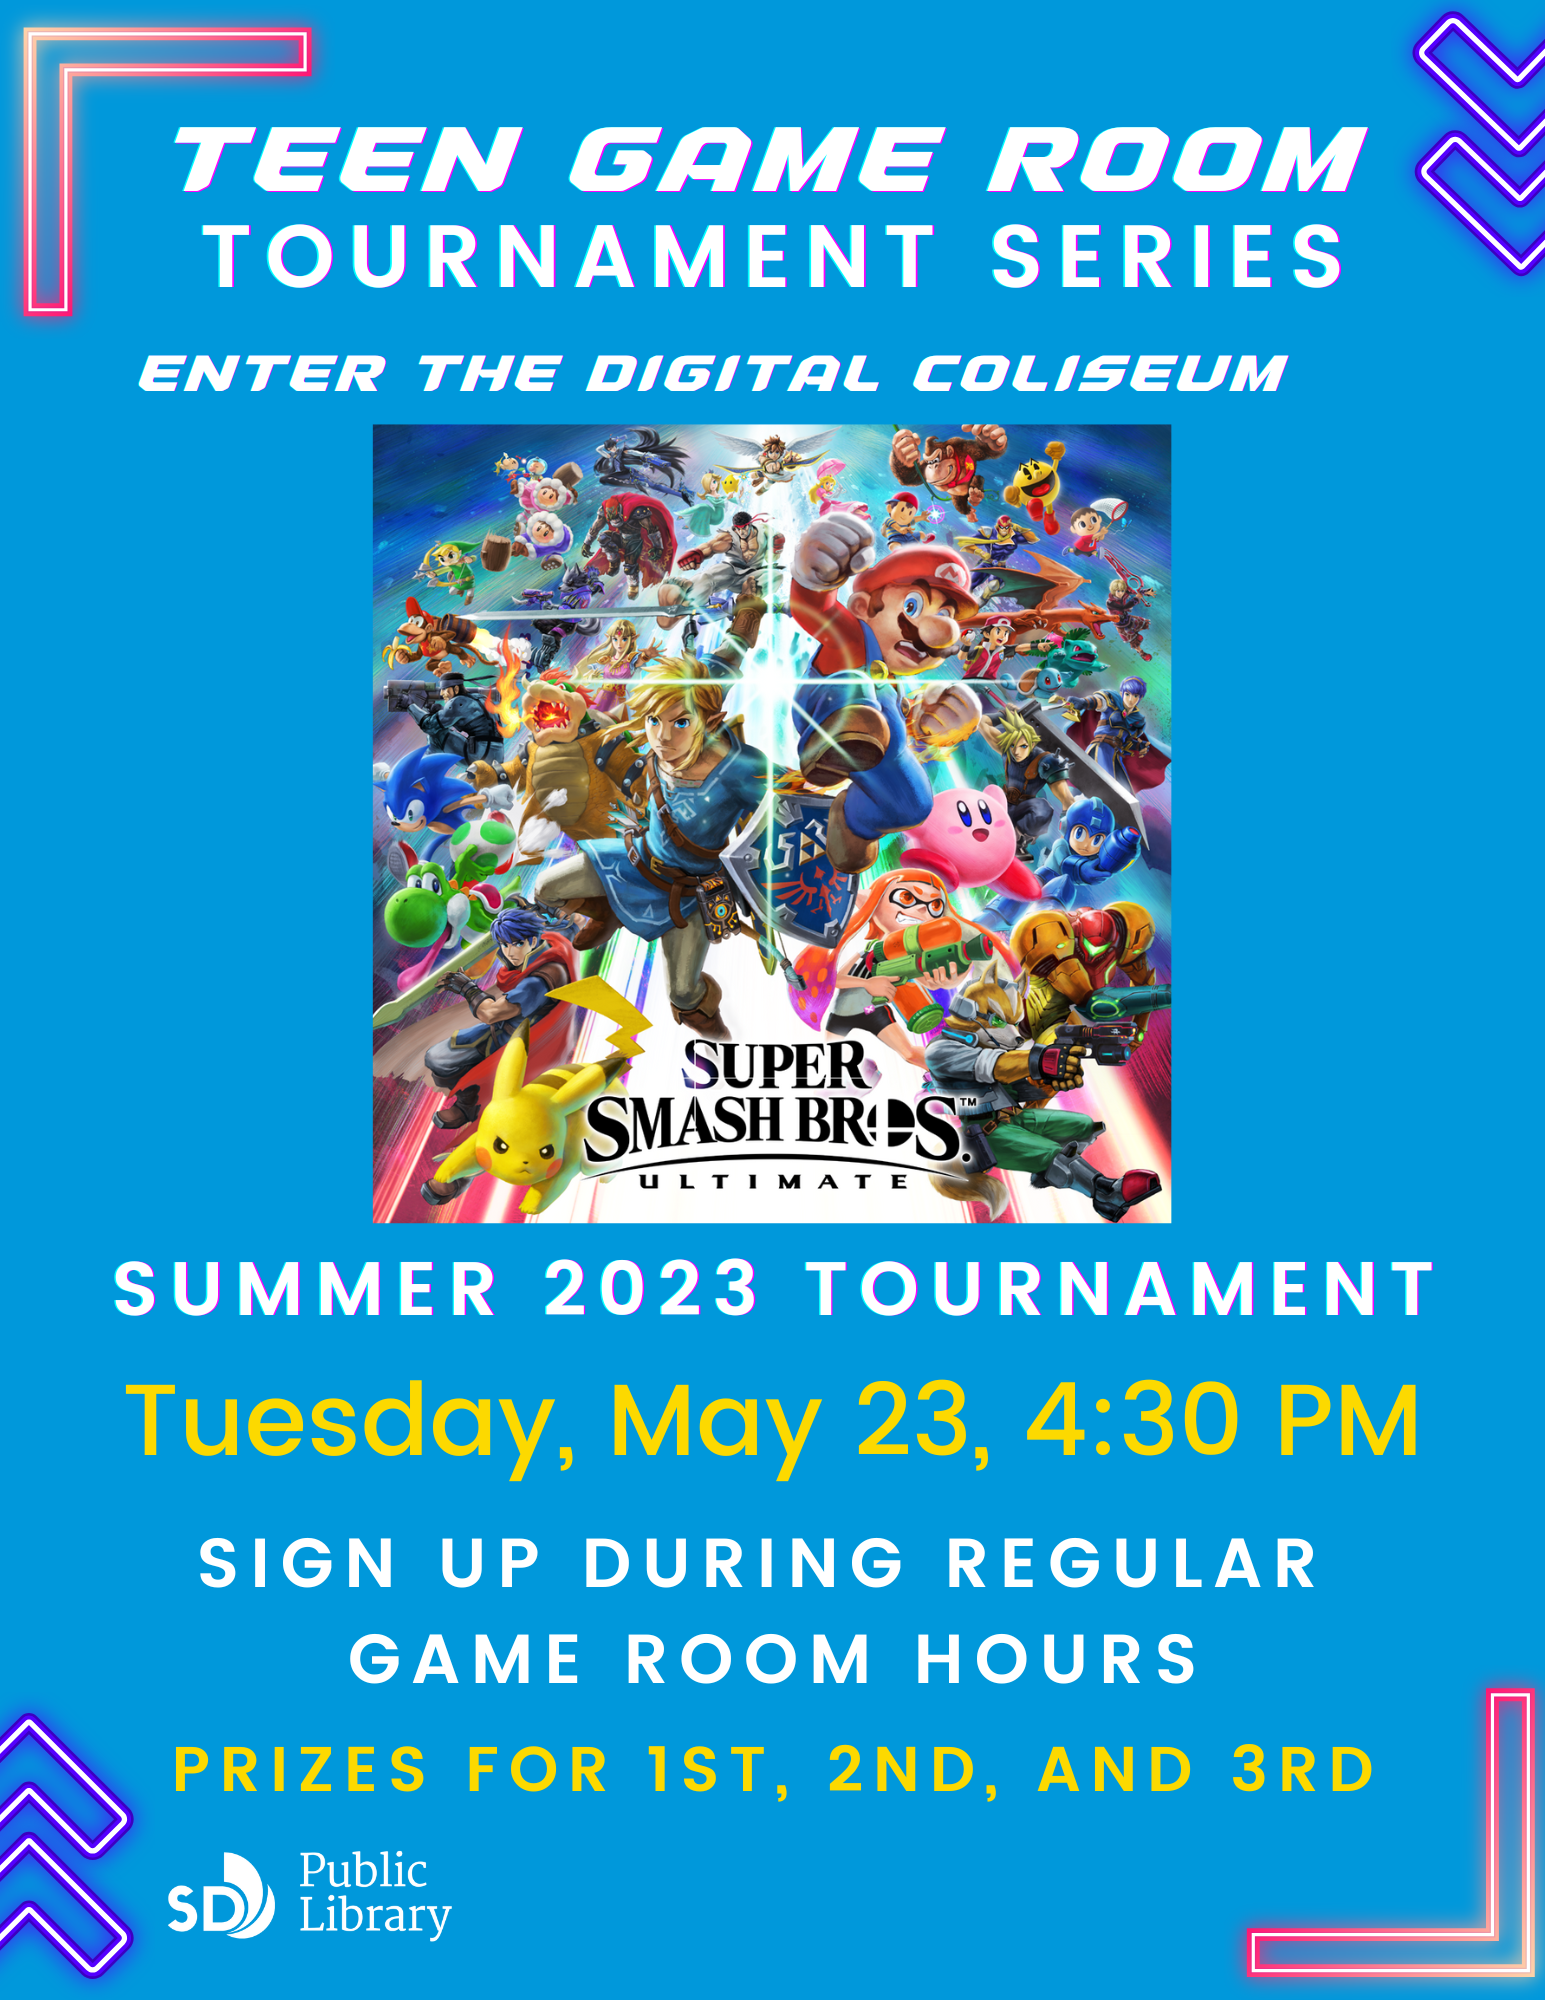 Teen Game Room Tournament Series. Enter the digital coliseum. Super Smash Bros Ultimate Summer 2023 Tournament. Tuesday, July 18, 3PM. Sign up during regular game room hours (Monday-Thursday, 4 PM to 5:45 PM).